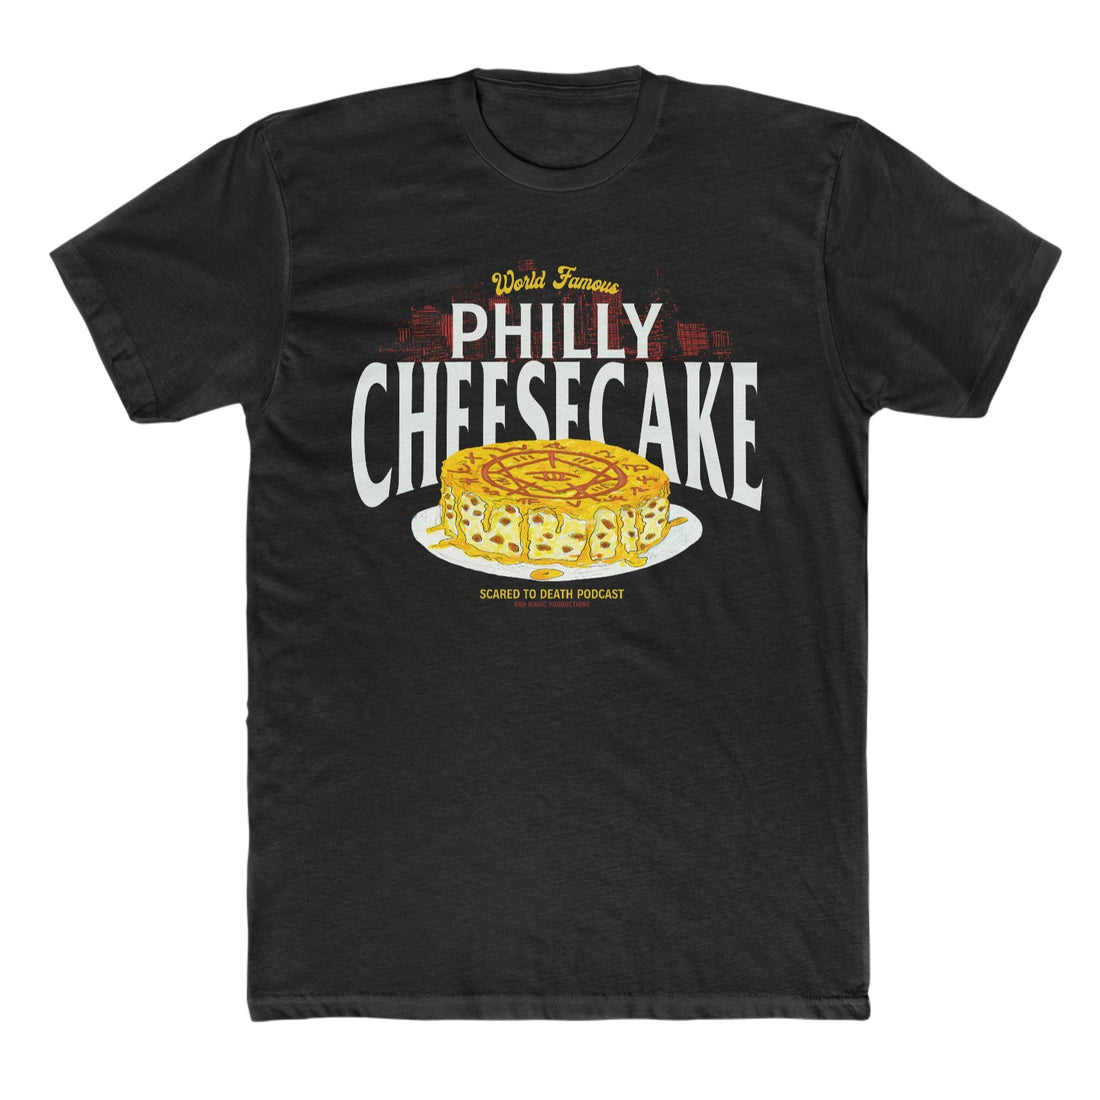 Philly Cheesecake Tee